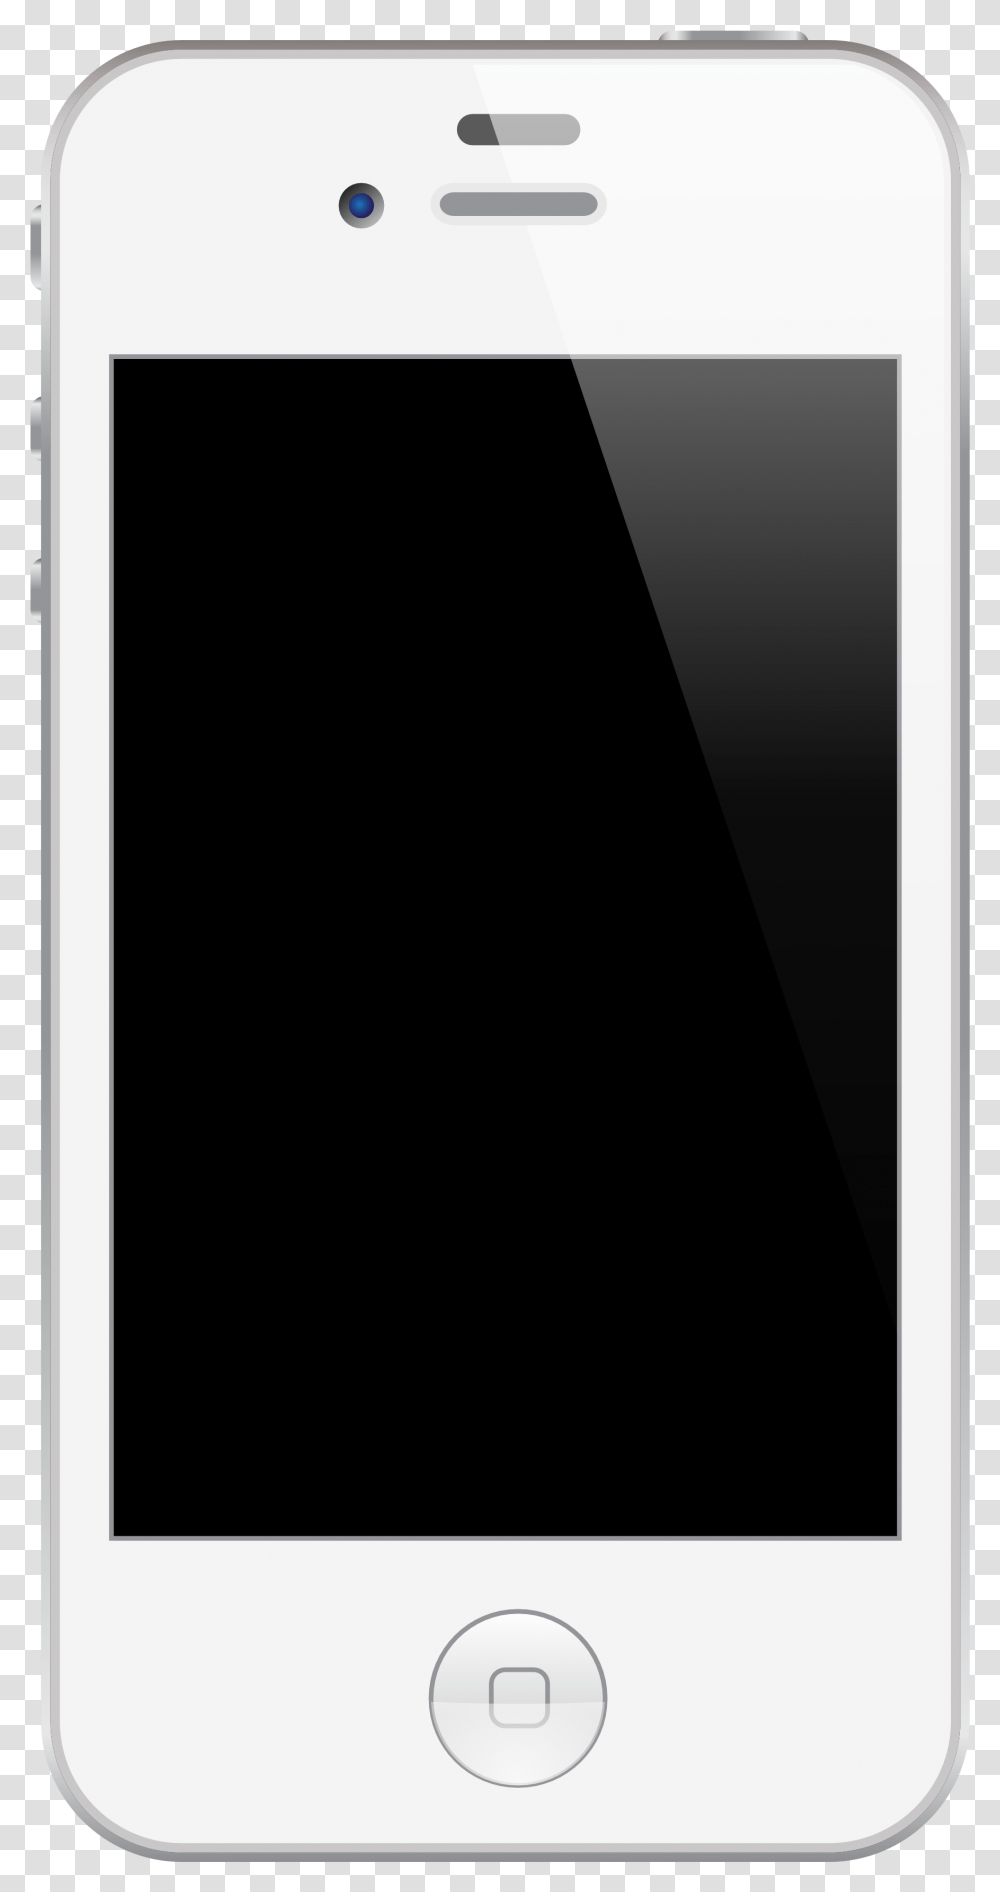 Cell Phone Colorable Outline Coloring Pages Of Phones, Electronics, Mobile Phone, Iphone Transparent Png